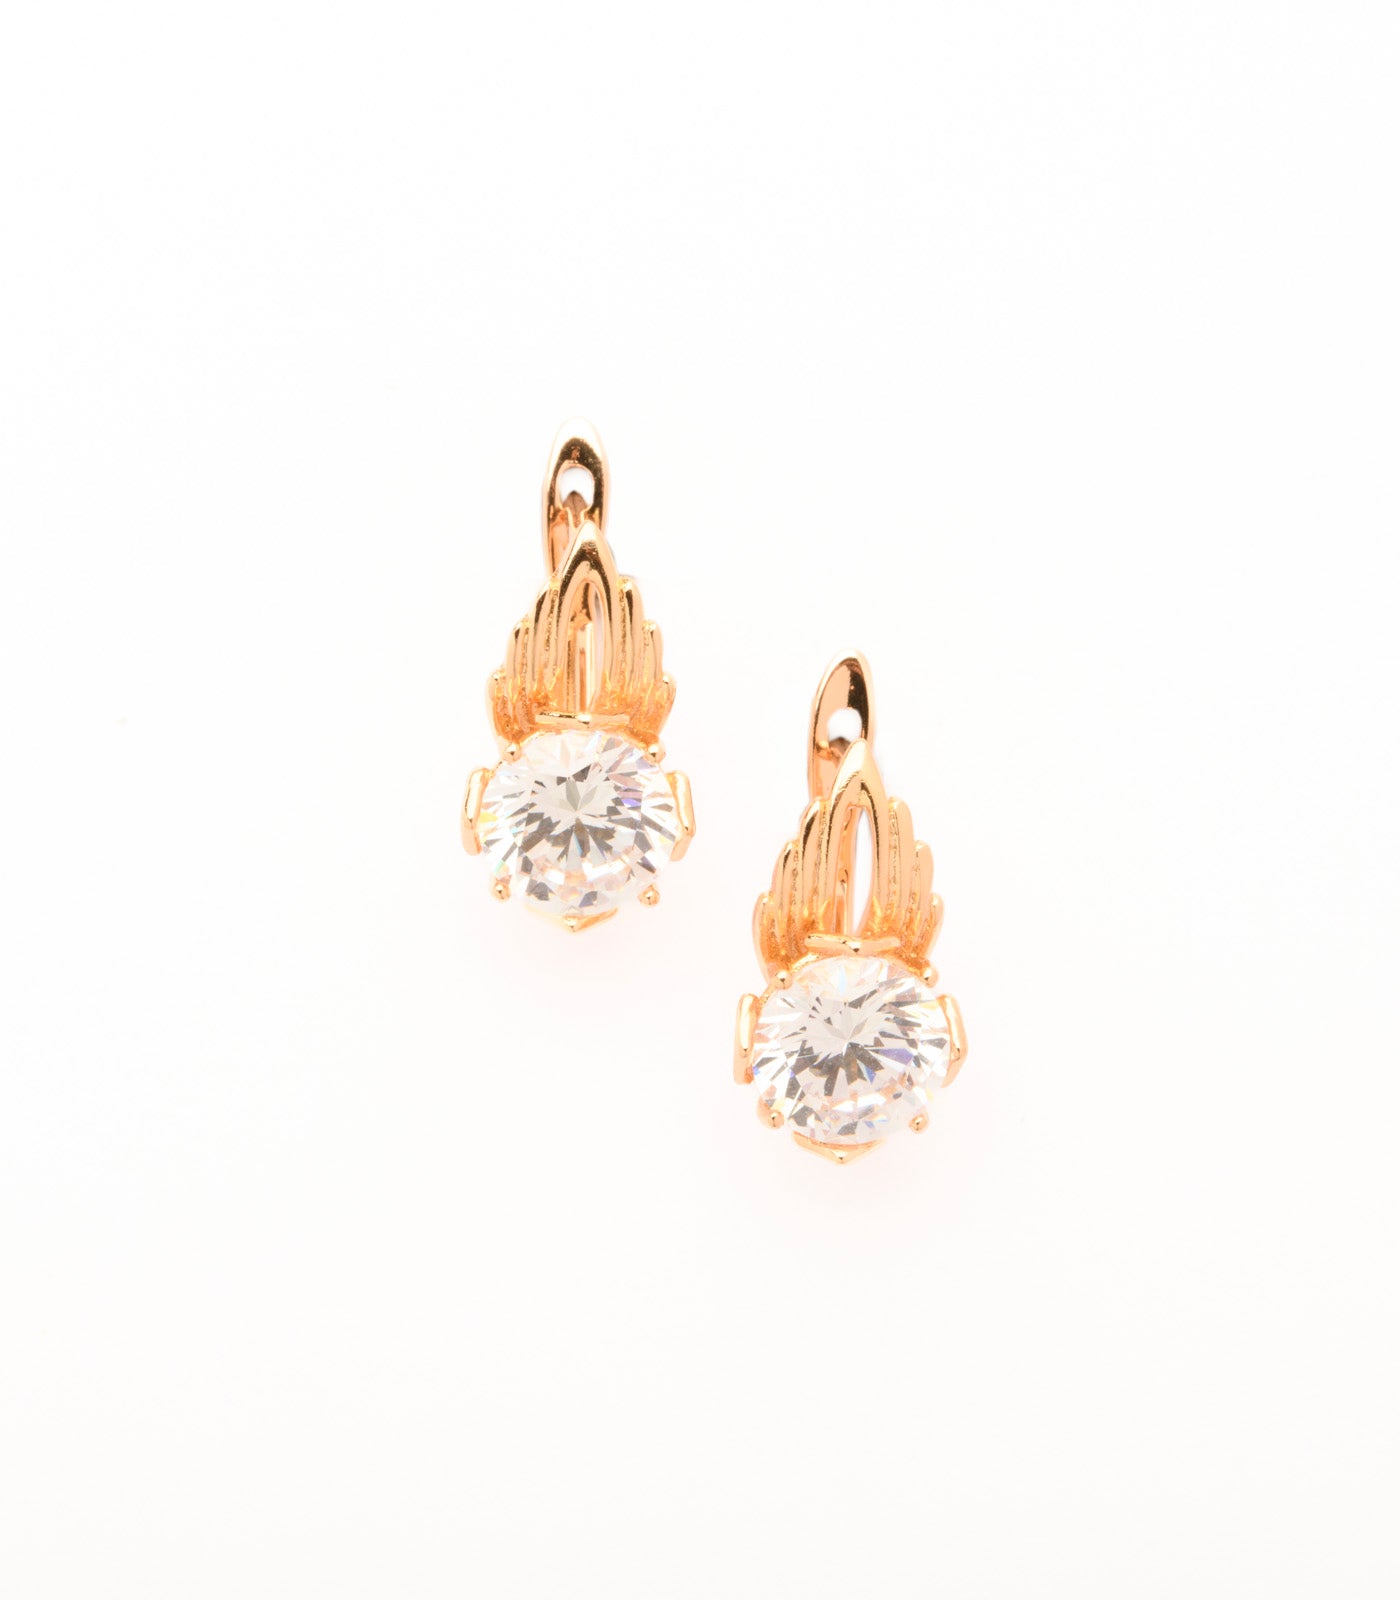 Exceptional Golden Falling Dots Of Shiny Stones Earrings (Brass)